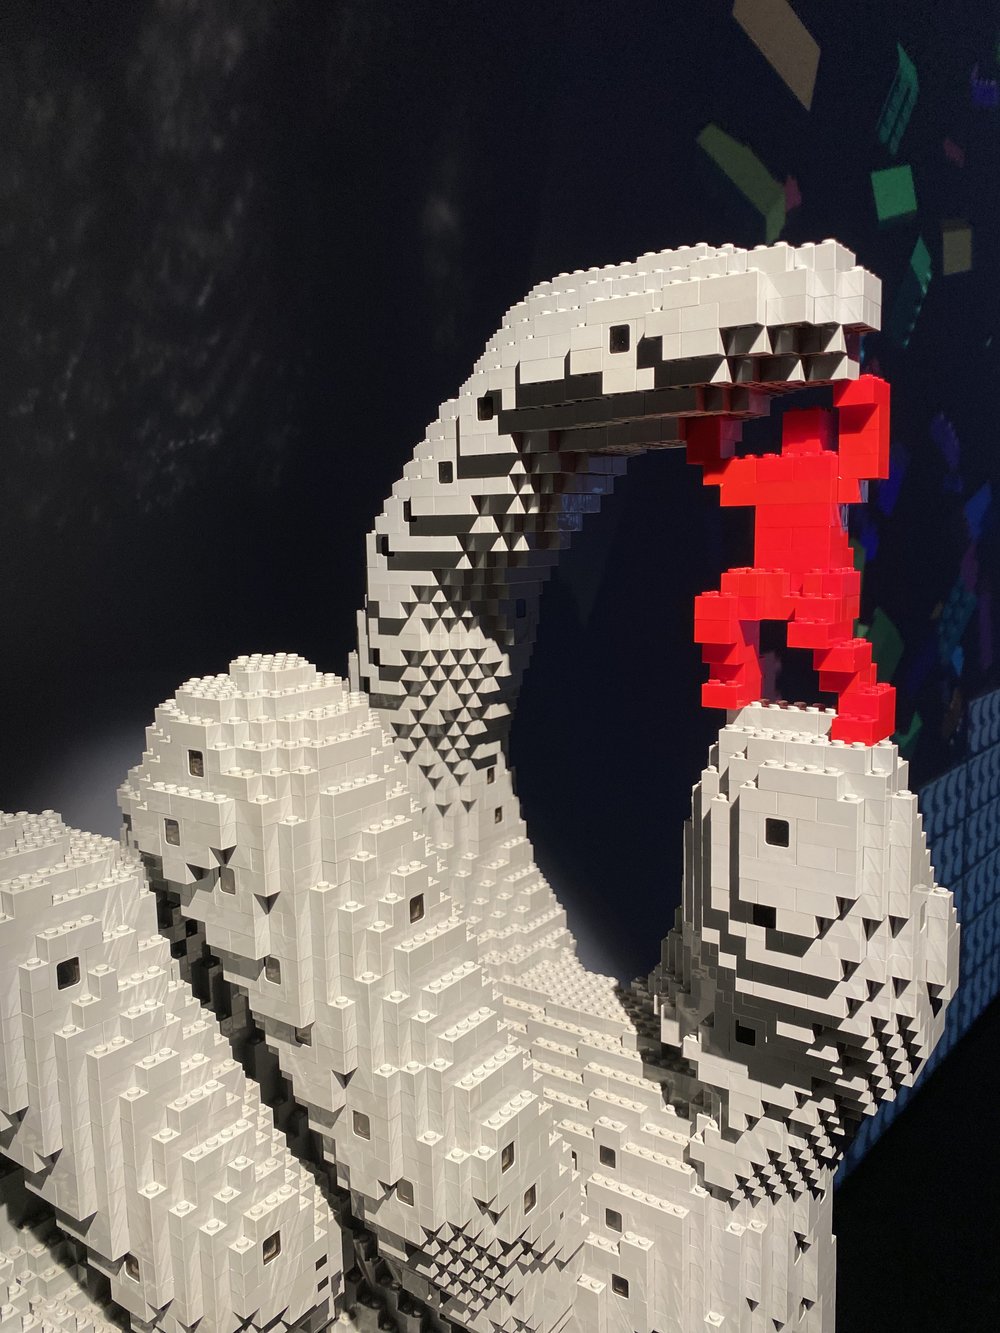 The Art of the Brick Raleigh: A LEGO® Art Exhibit